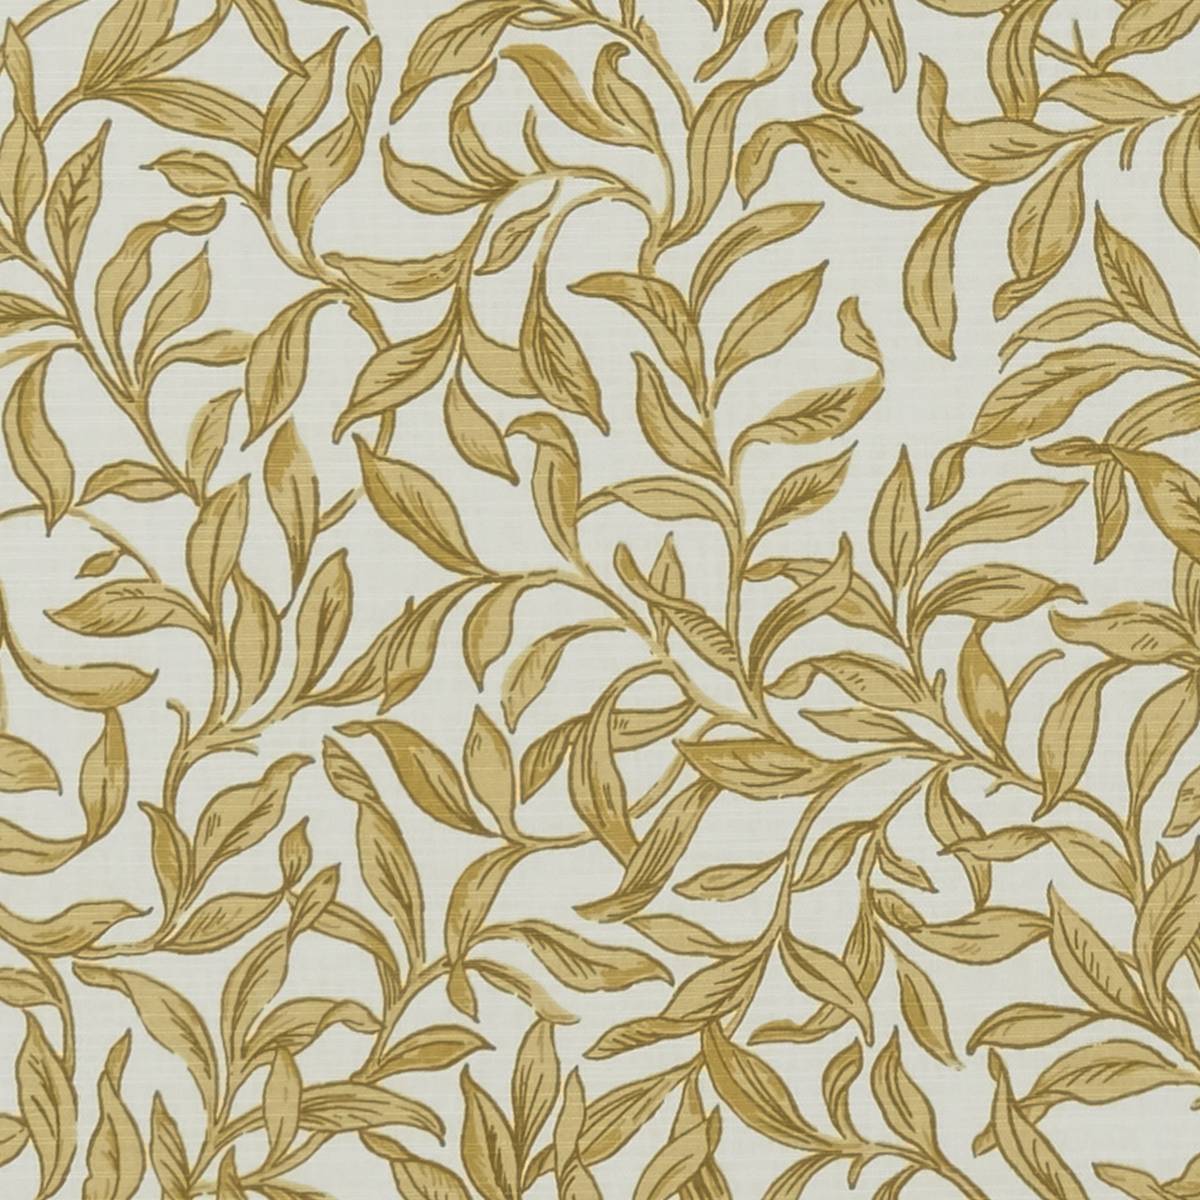 Entwistle Gold Fabric by Studio G